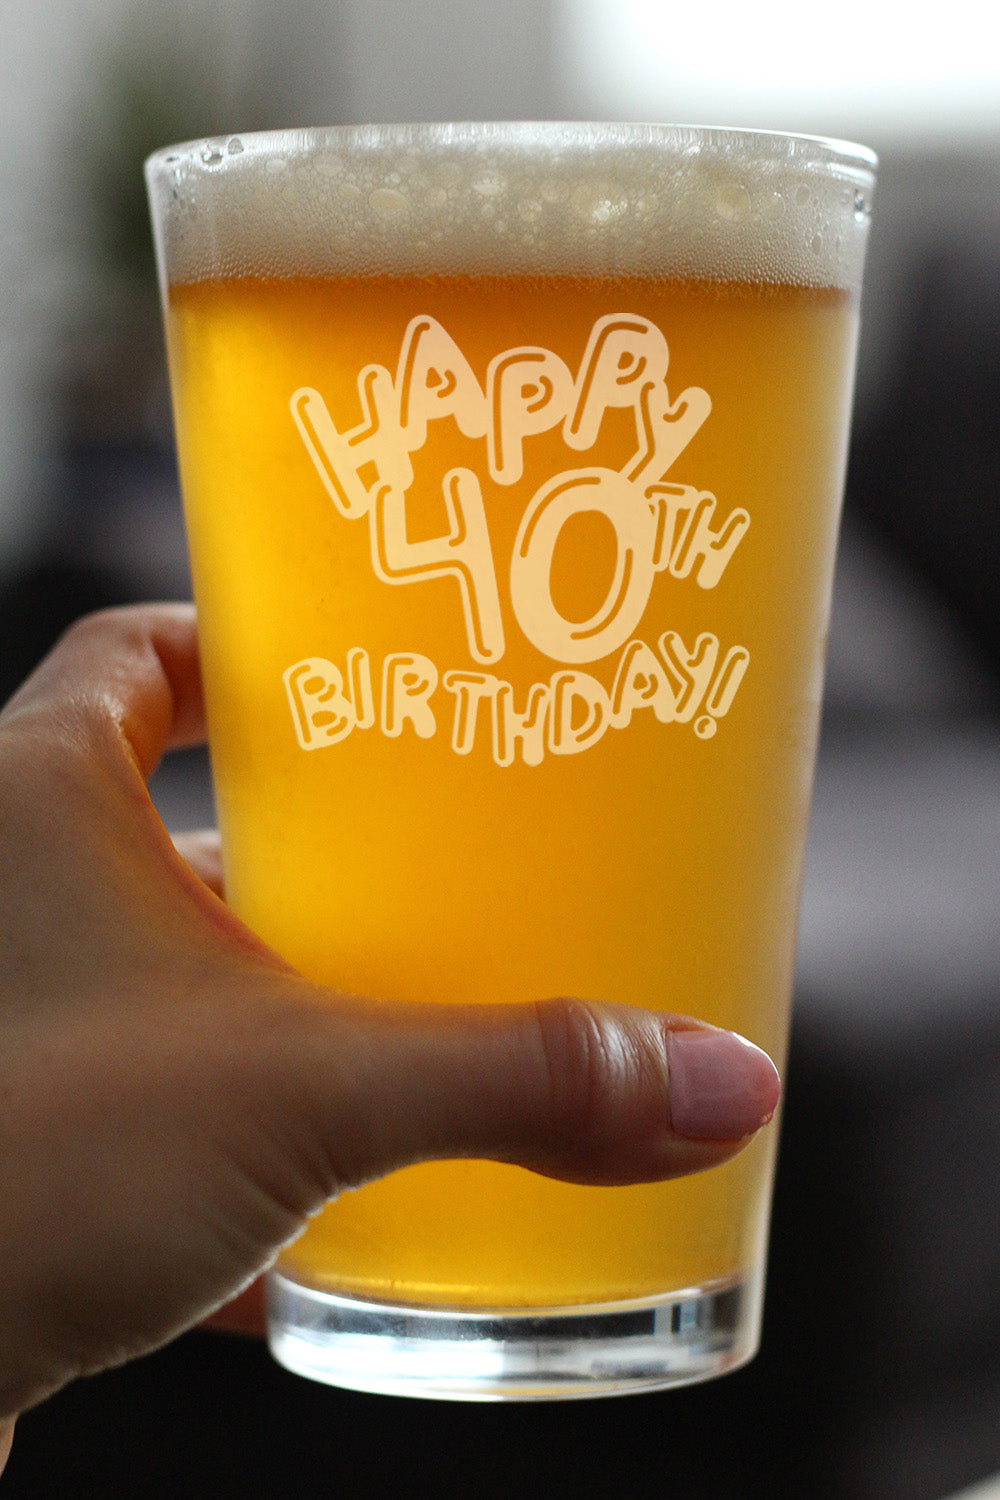 Happy 40th Birthday Balloons - Pint Glass for Beer - Gifts for Women &amp; Men Turning 40 - Fun Bday Party Decor - 16 Oz